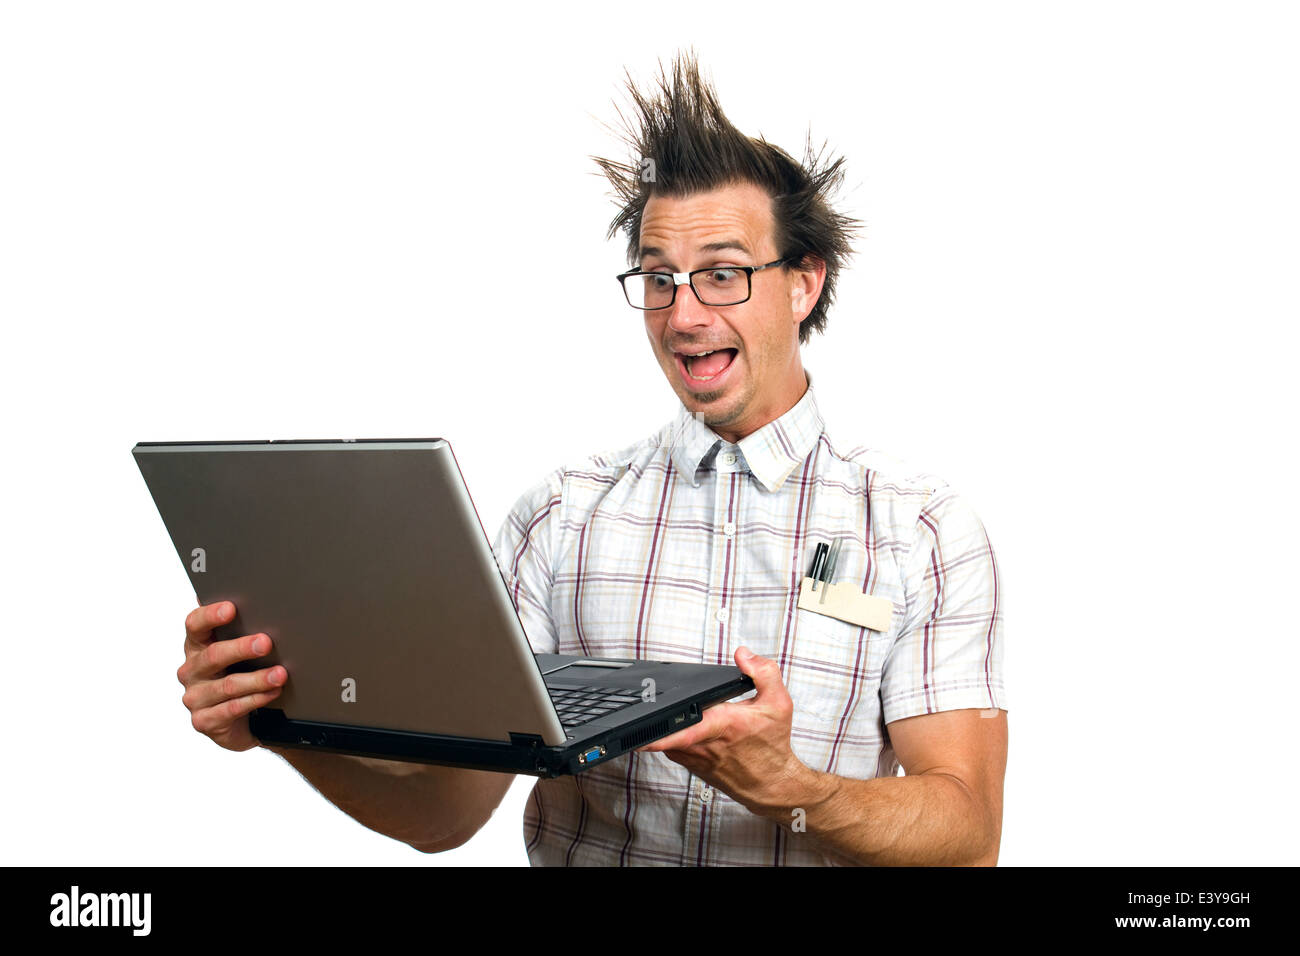 Computer nerd gets frightened viewing the internet on a laptop screen. Stock Photo